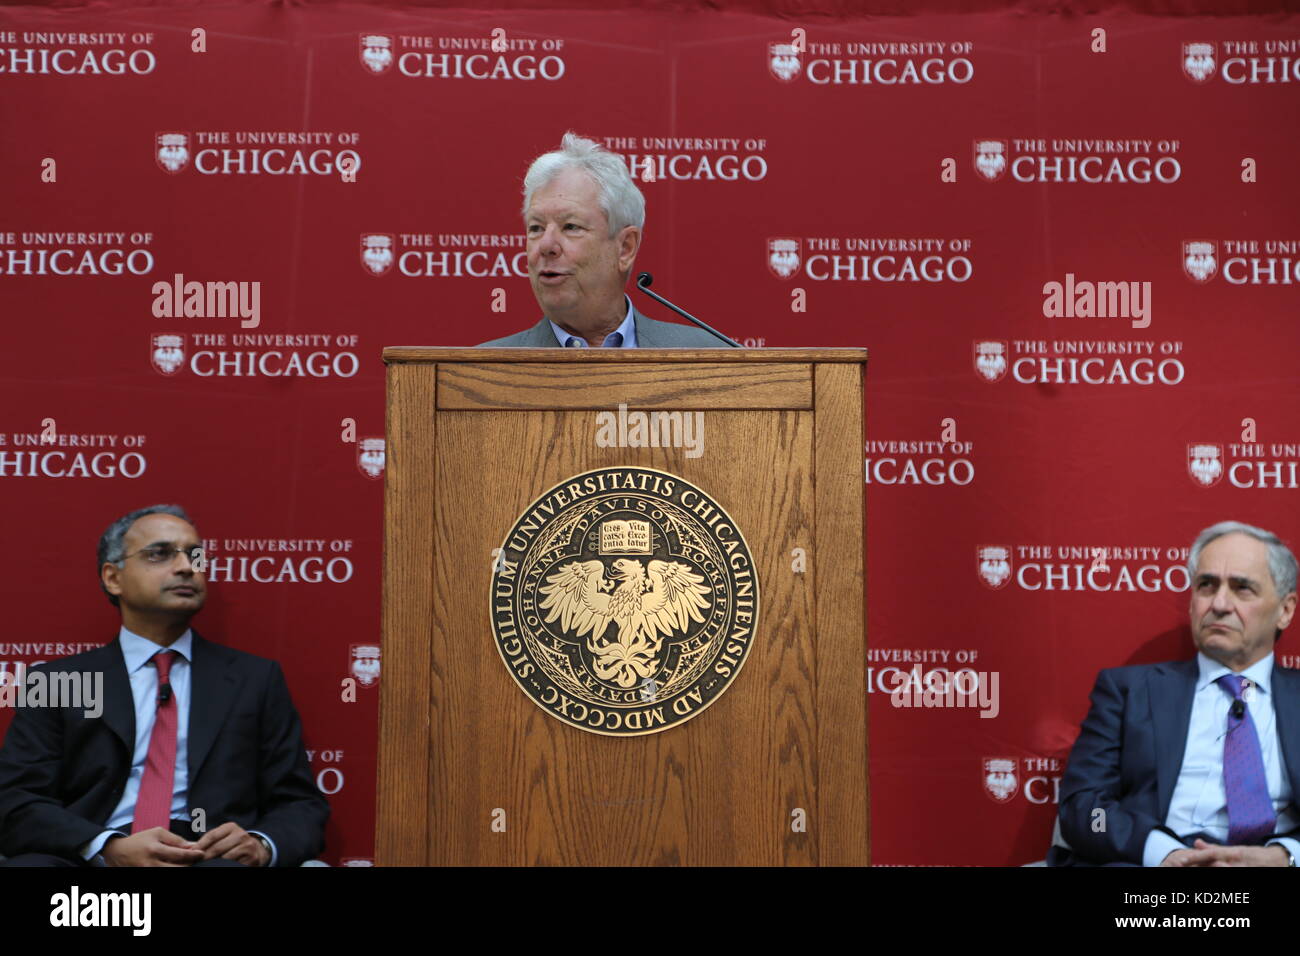 Chicago, USA. 9th Oct, 2017. Richard H. Thaler (C), 2017 Nobel Prize winner in Economics, speaks during a press conference at University of Chicago Booth School of Business in Chicago, the United States, on Oct. 9, 2017. The 2017 Nobel Prize in Economics was awarded to Richard H. Thaler 'for his contributions to behavioural economics,' announced the Royal Swedish Academy of Sciences on Monday. Credit: Wang Qiang/Xinhua/Alamy Live News Stock Photo